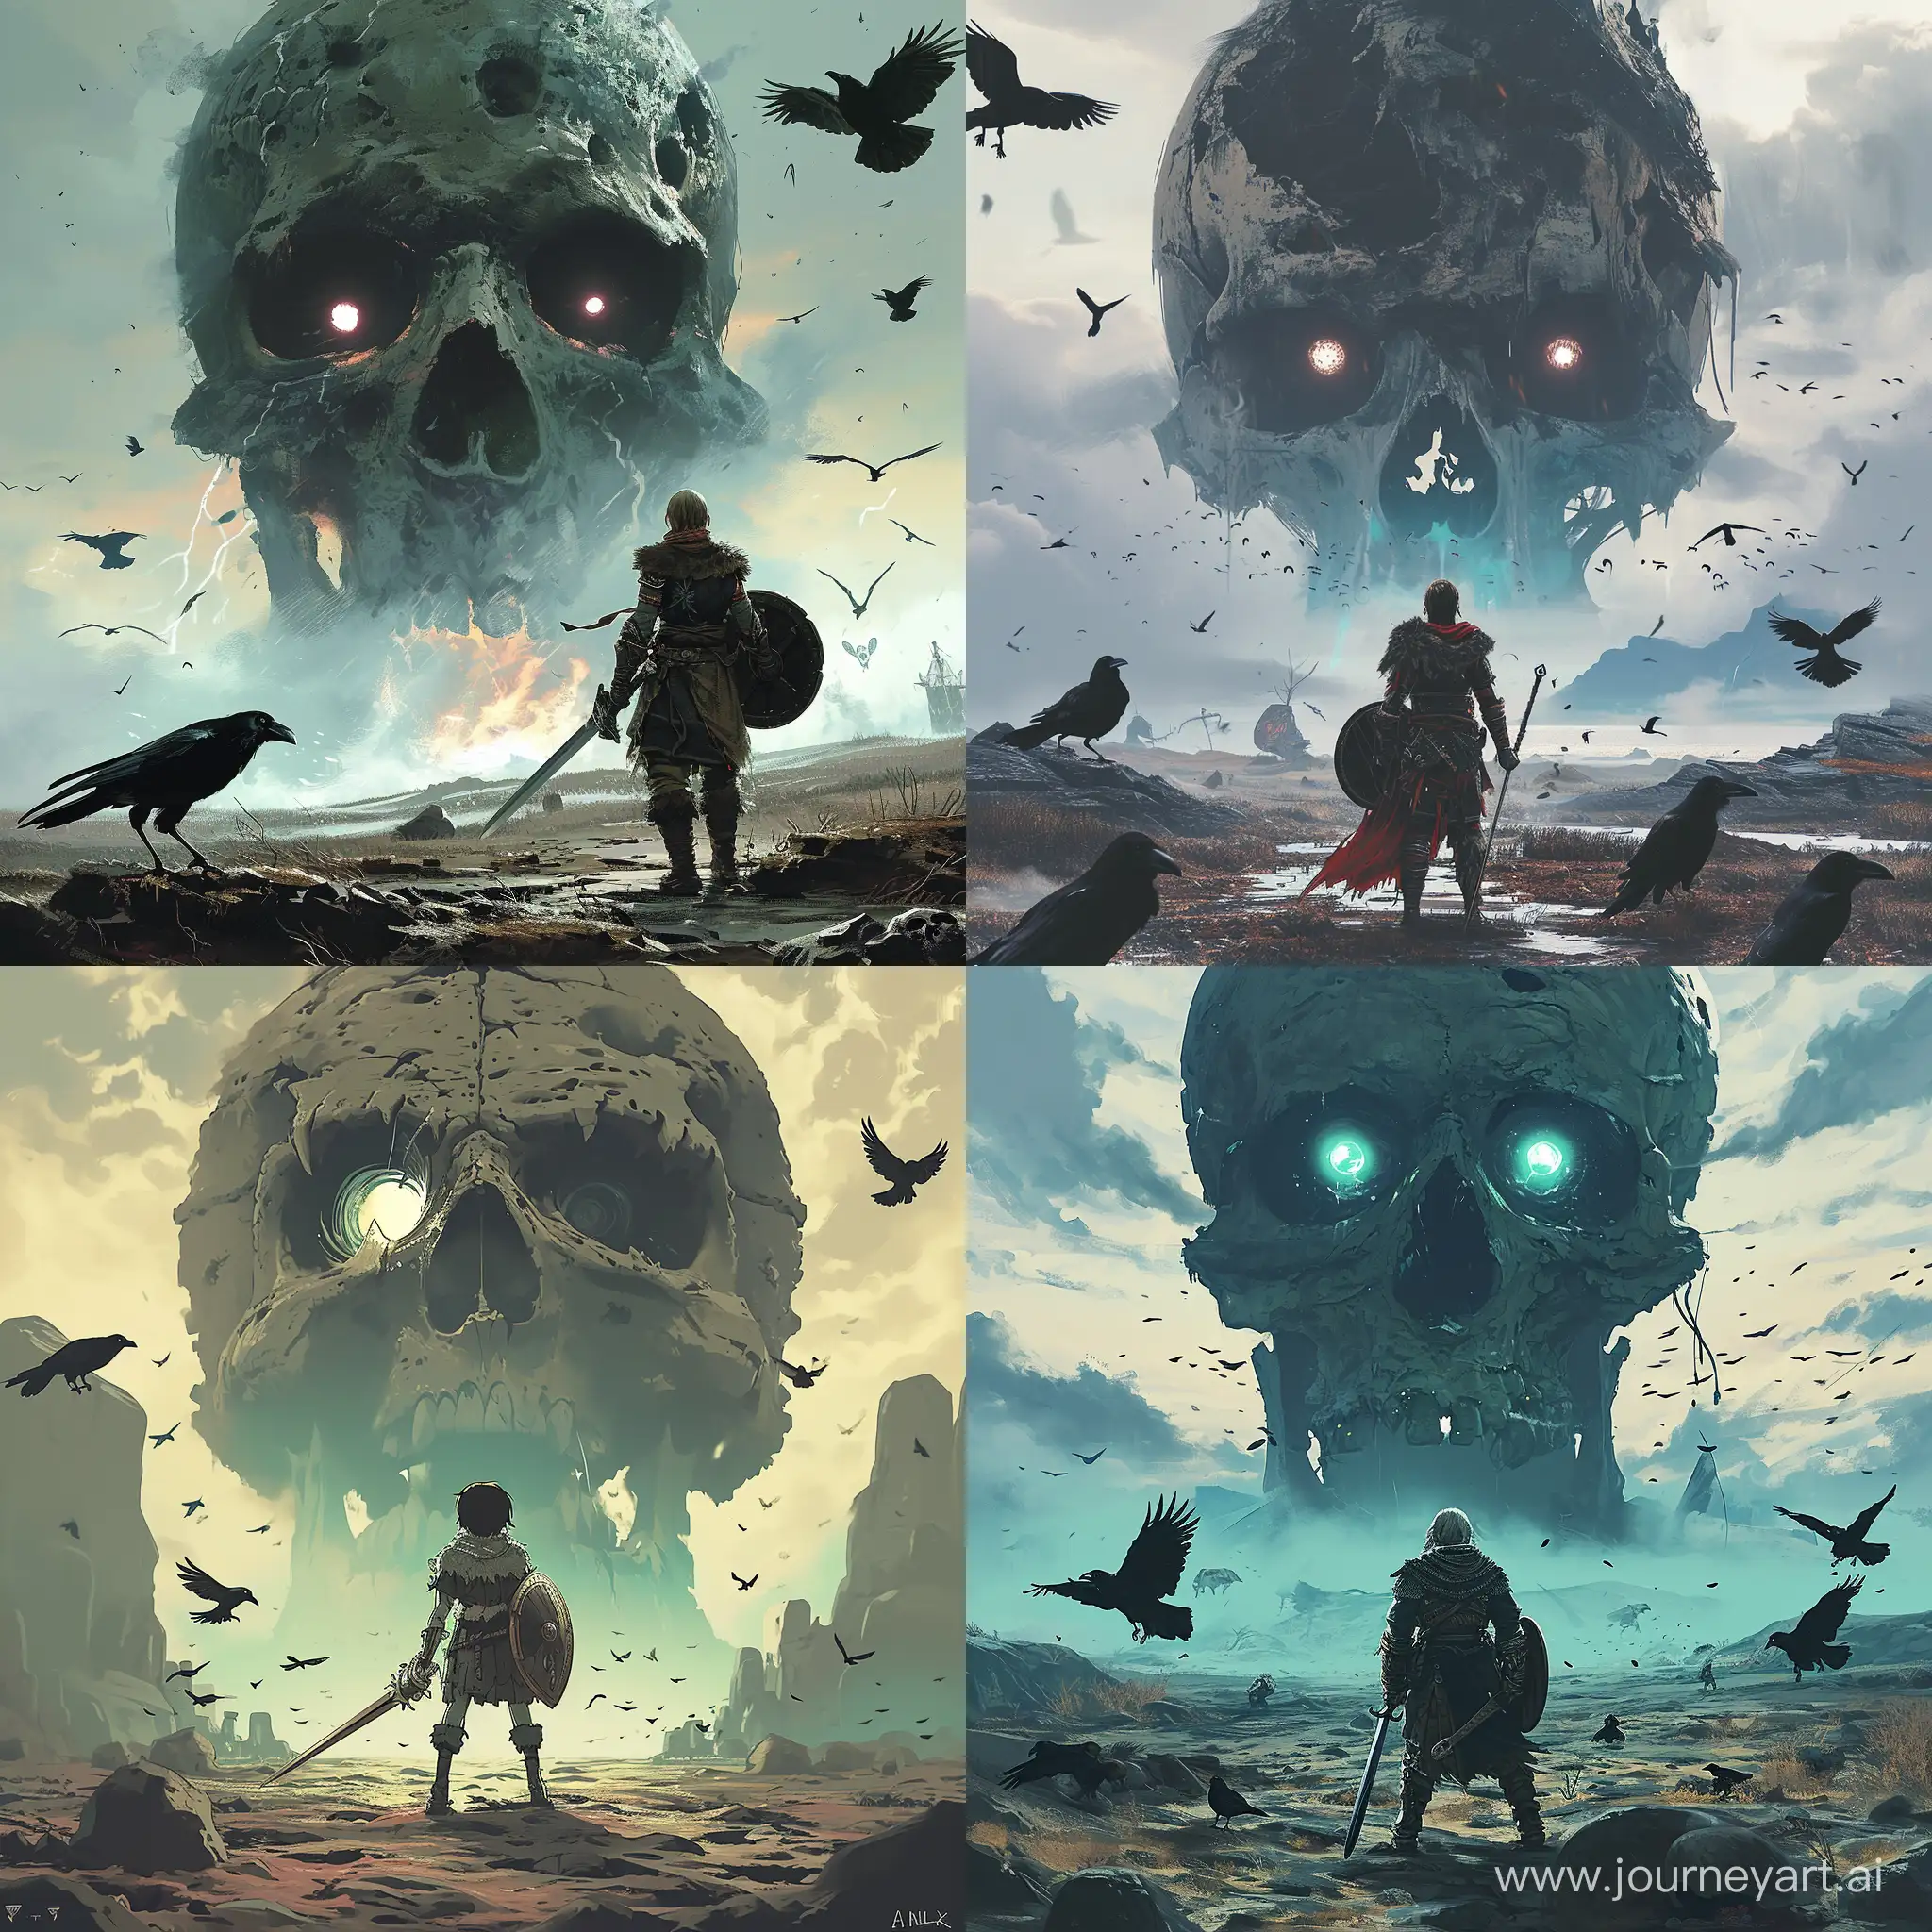 Anime-Warrior-Confronts-Giant-Skull-in-Desolate-Land